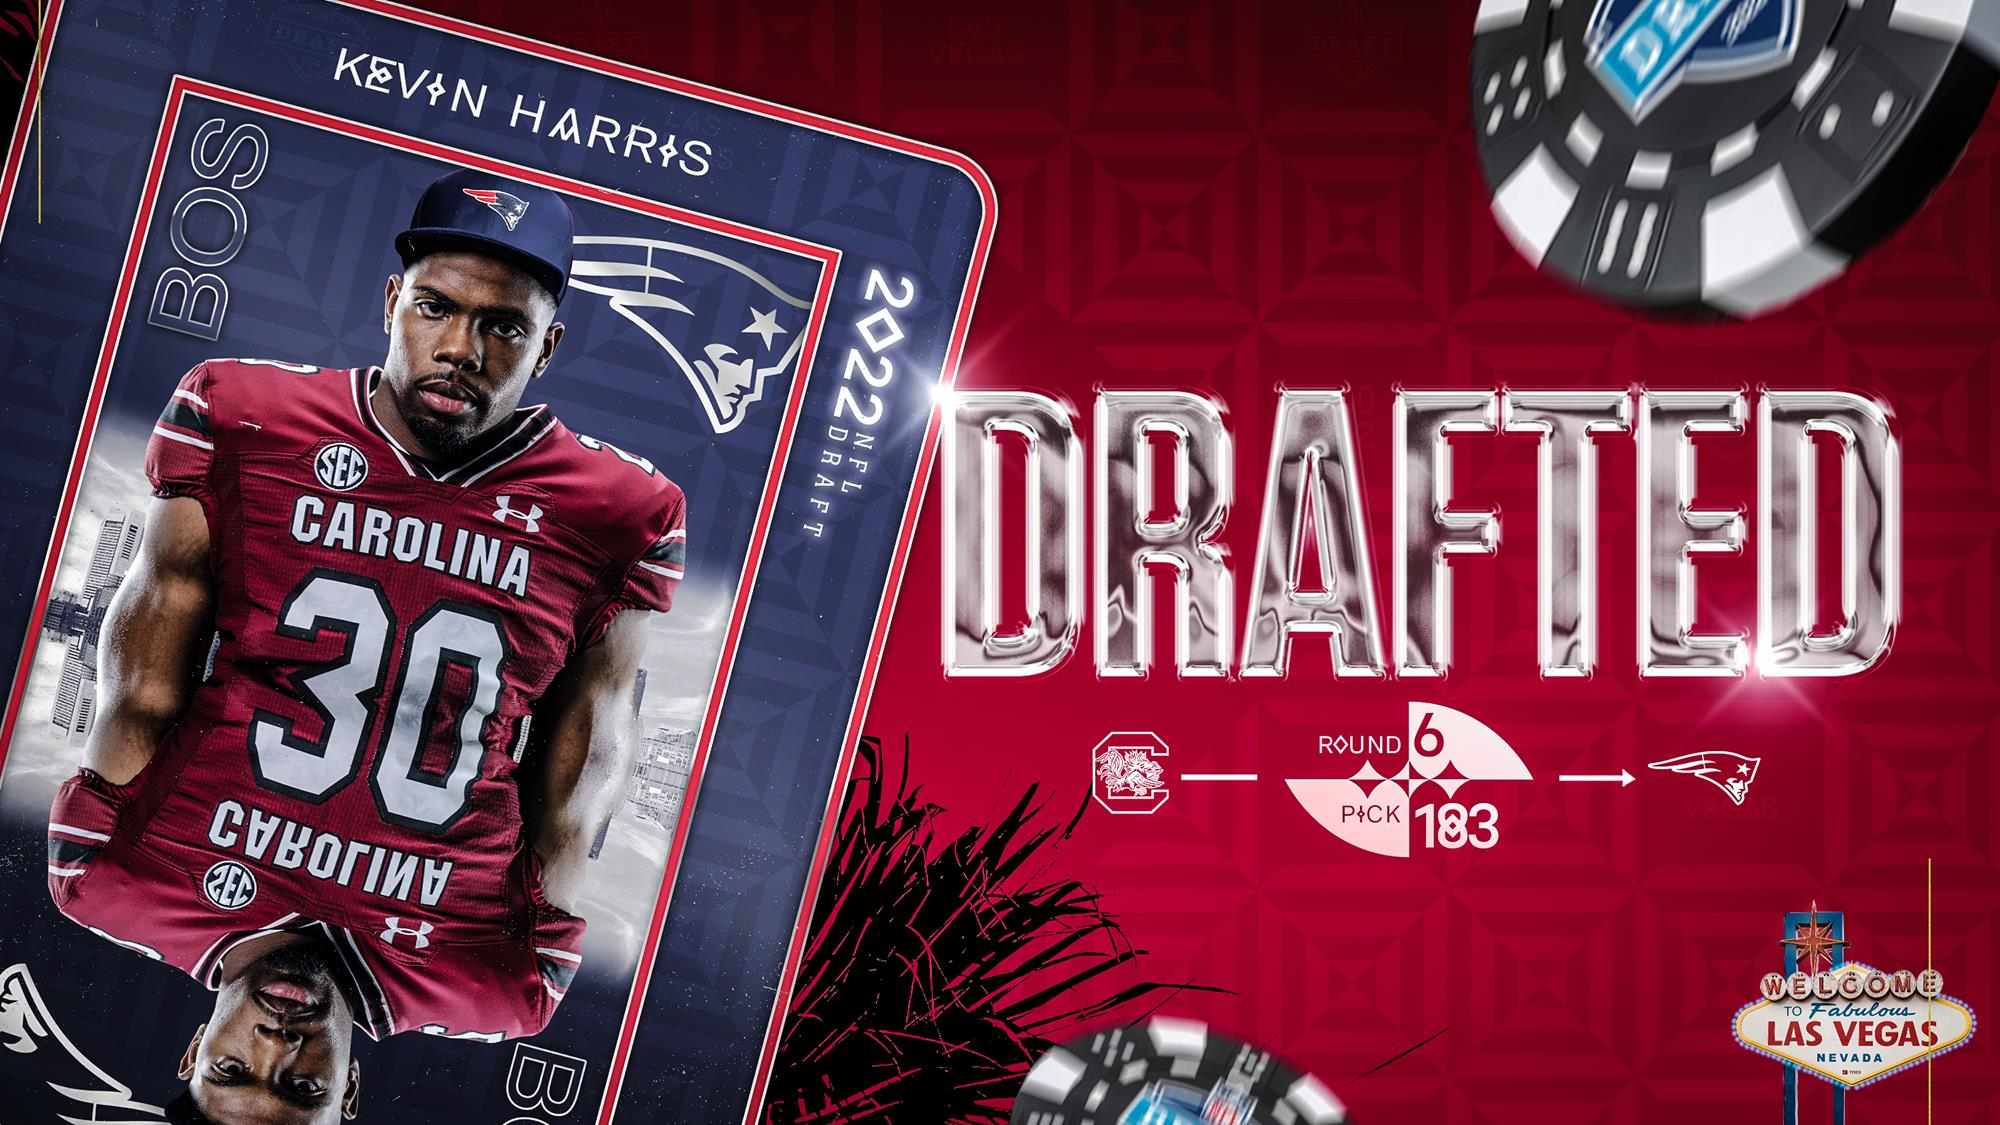 Harris Selected by New England in the Sixth Round of the 2022 NFL Draft